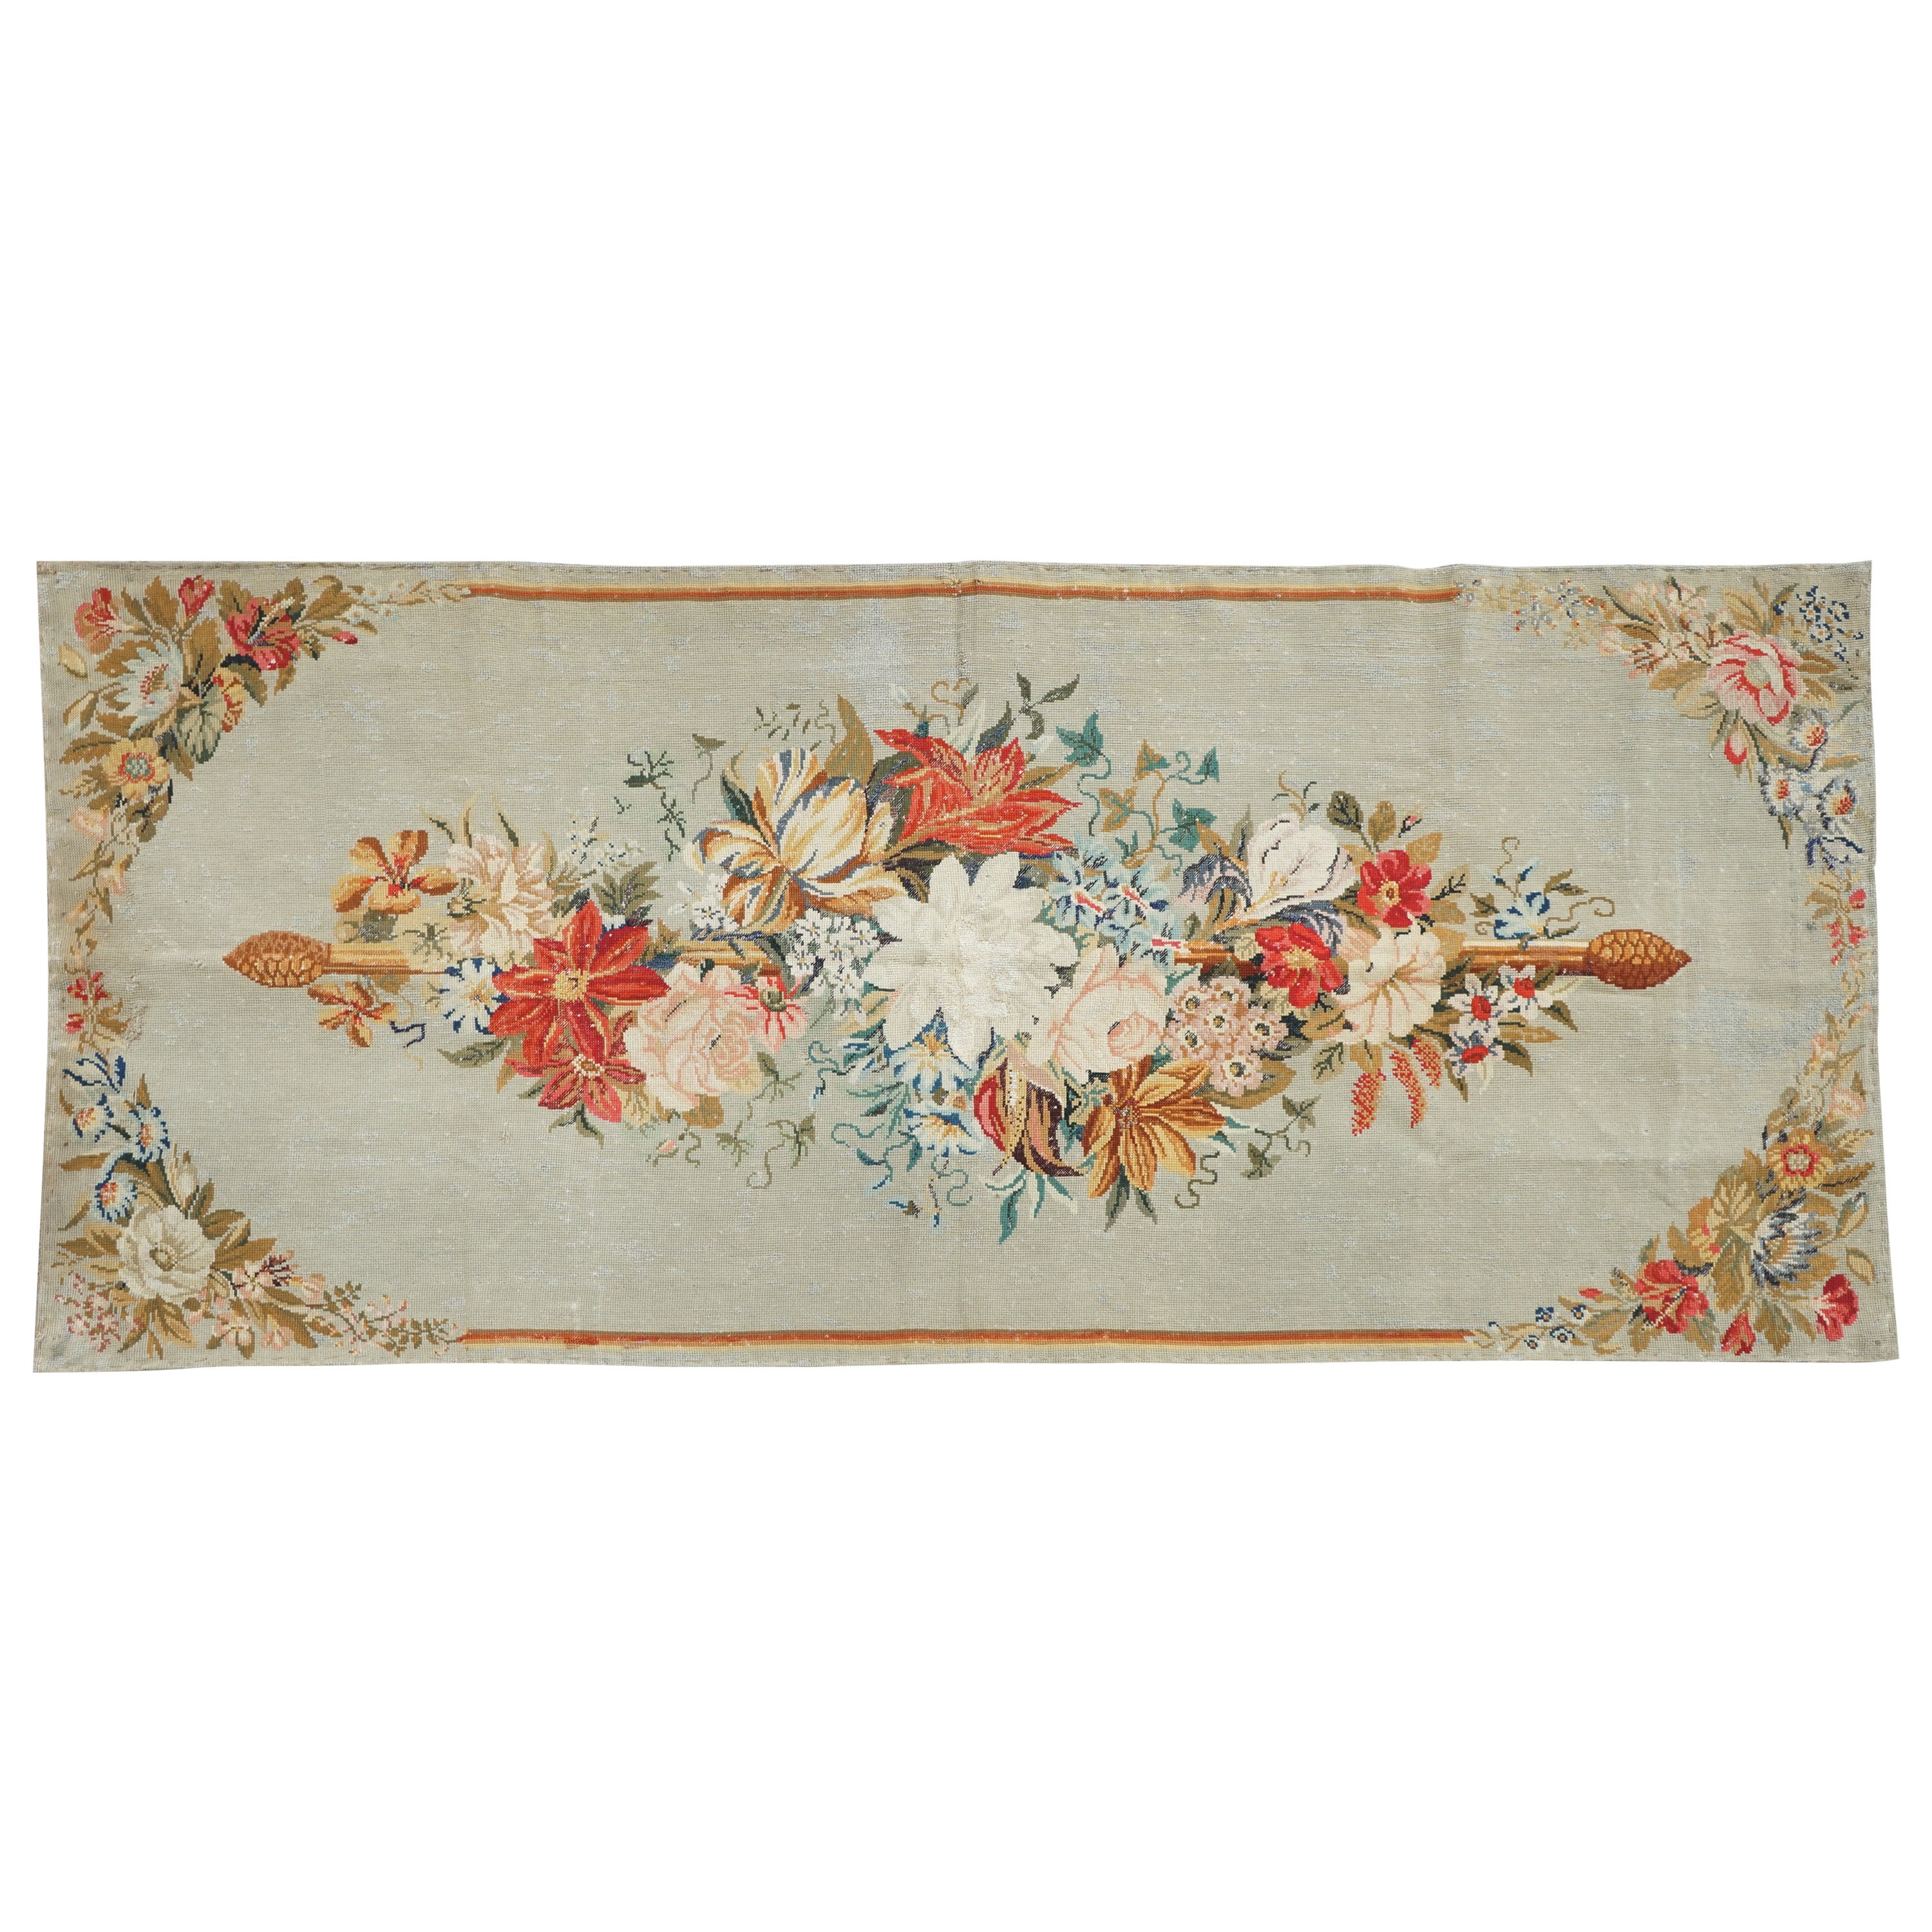 19th c. English Needlepoint Rug from the estate of Paul & Bunny Mellon